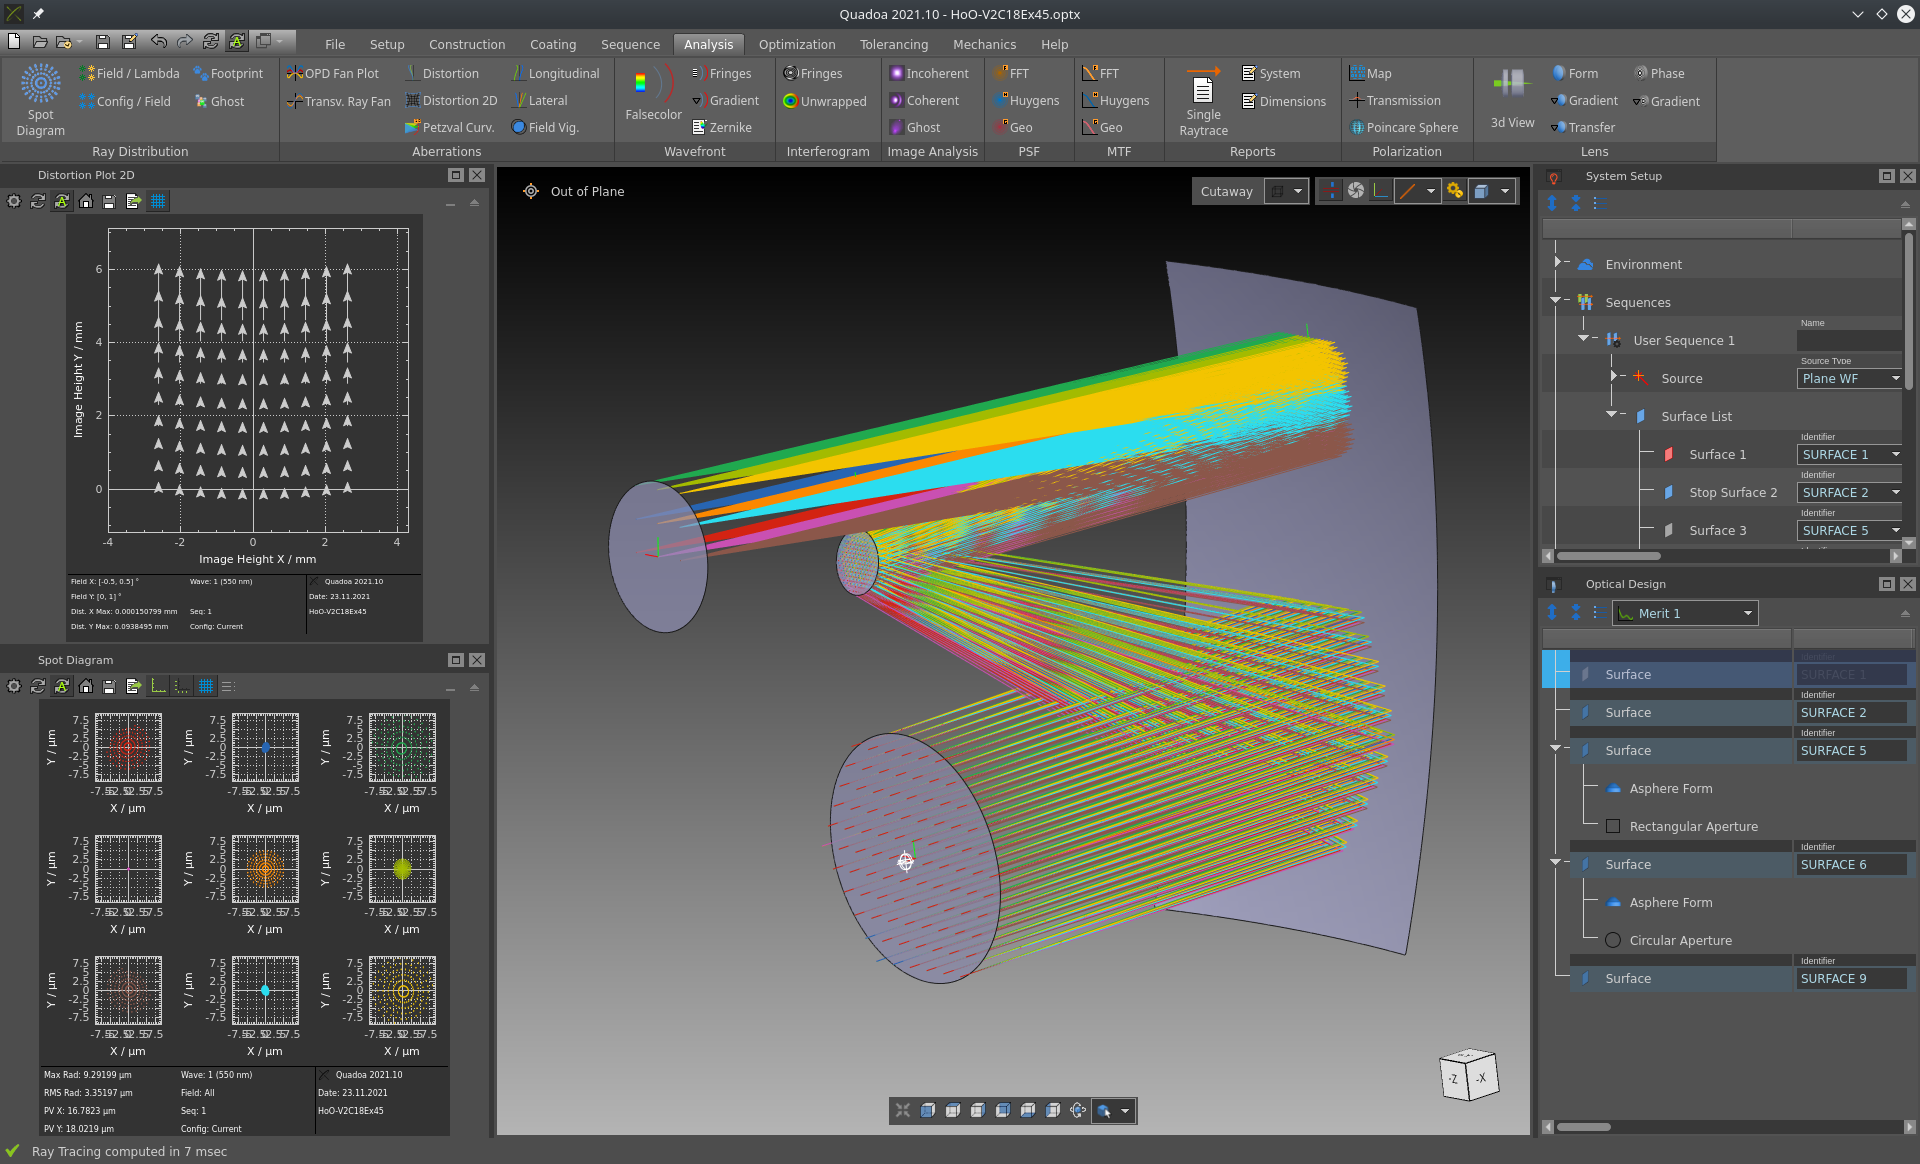 Off-axis telescope in the optical design and simulation software Quadoa Optical CAD